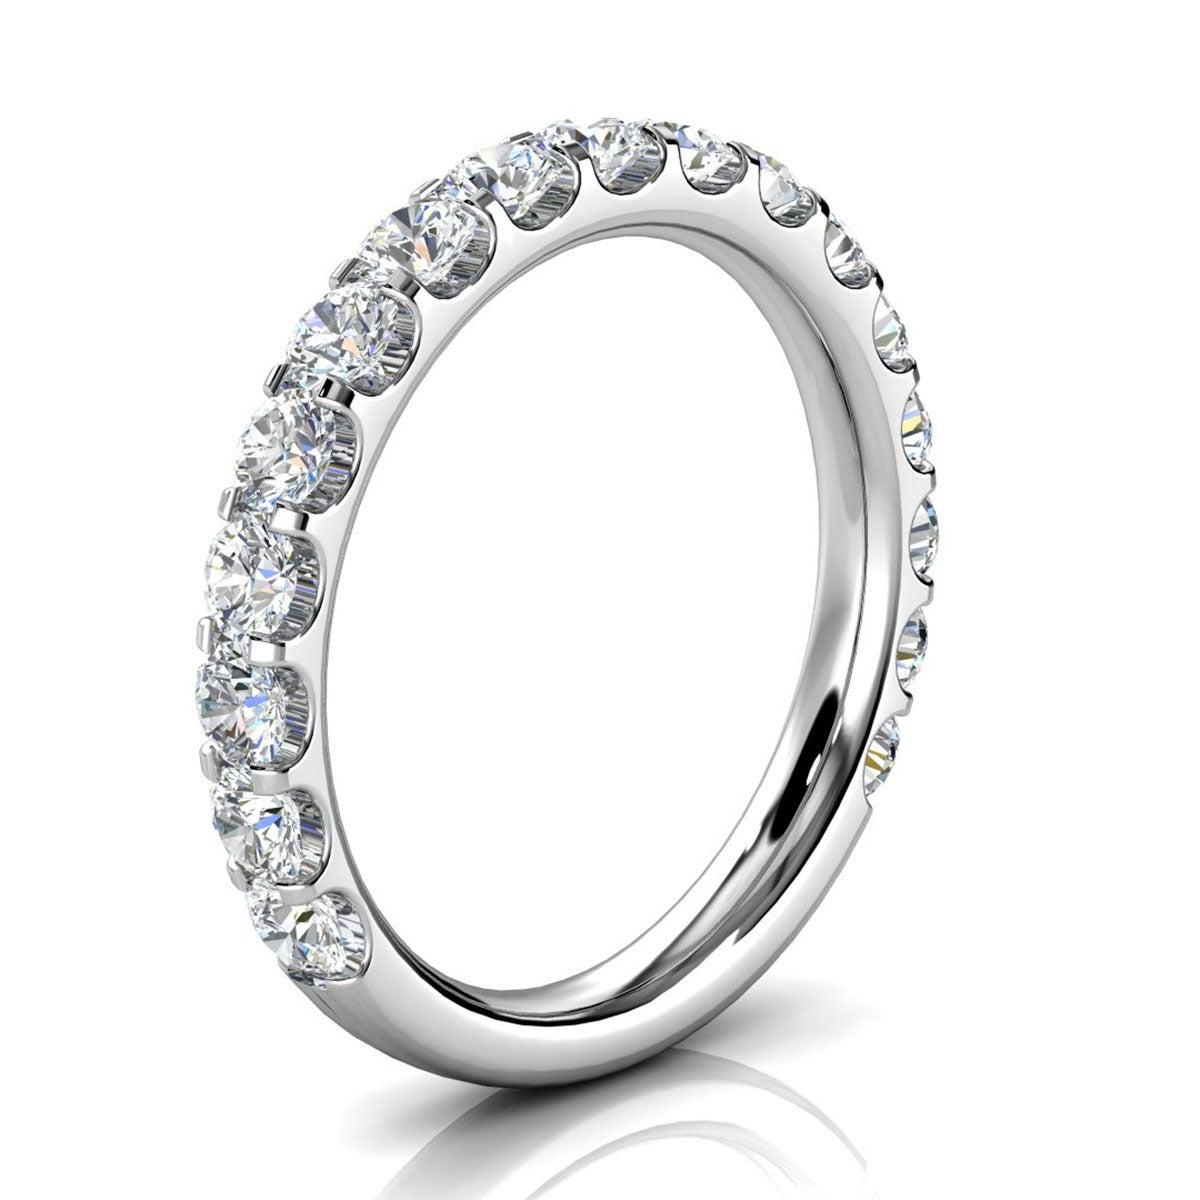 For Sale:  Platinum Micro-Prong Diamond Ring '1 Ct. tw' 2